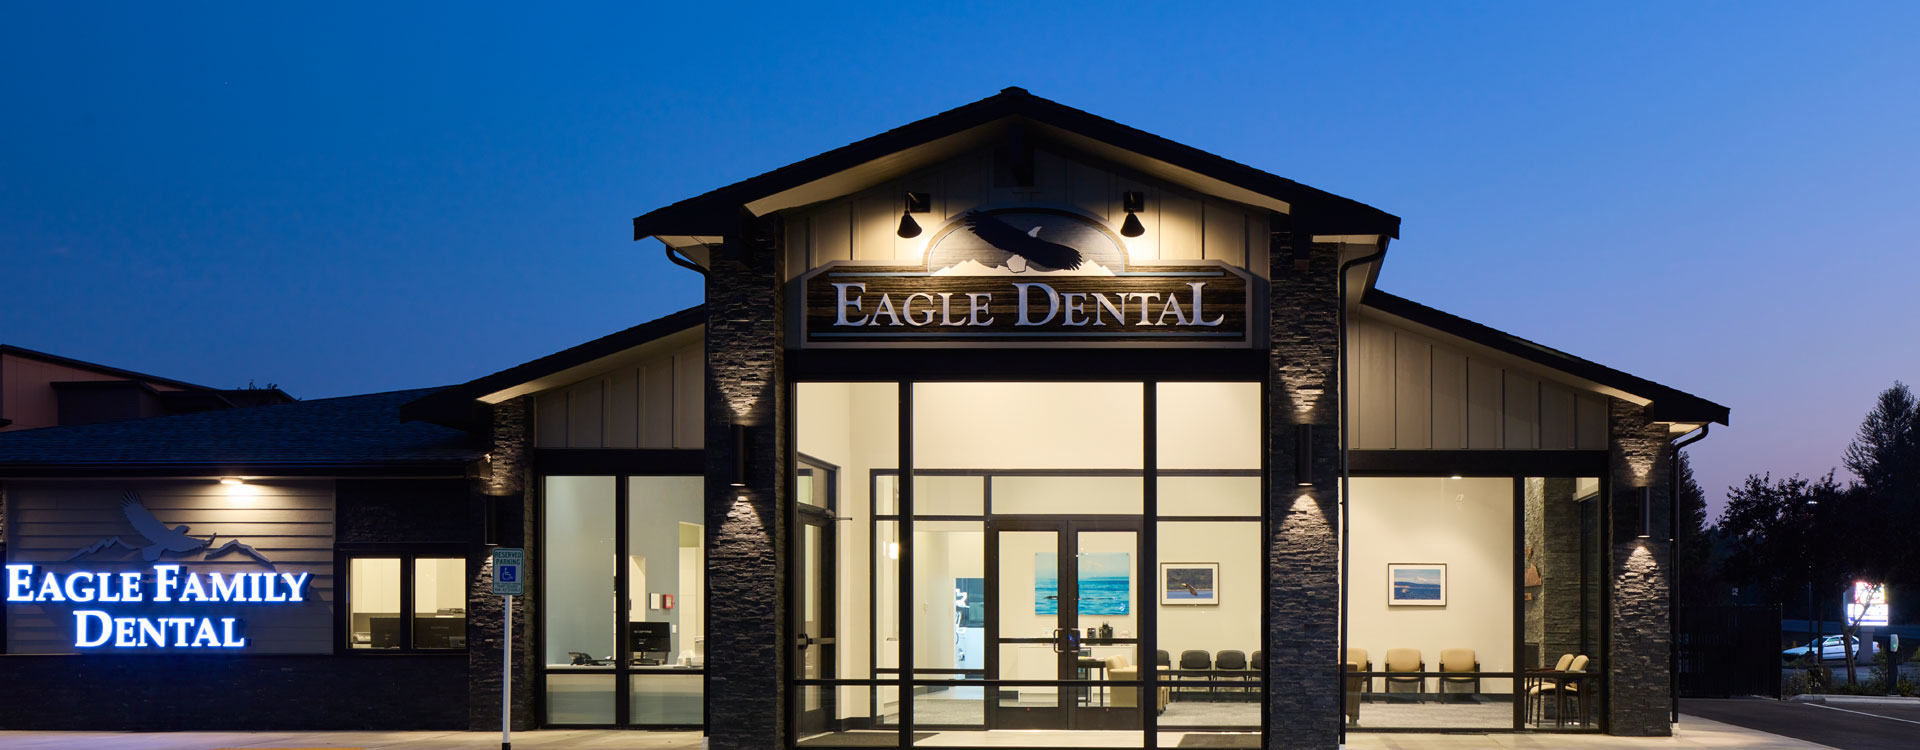 Eagle Family Dental Building Front View